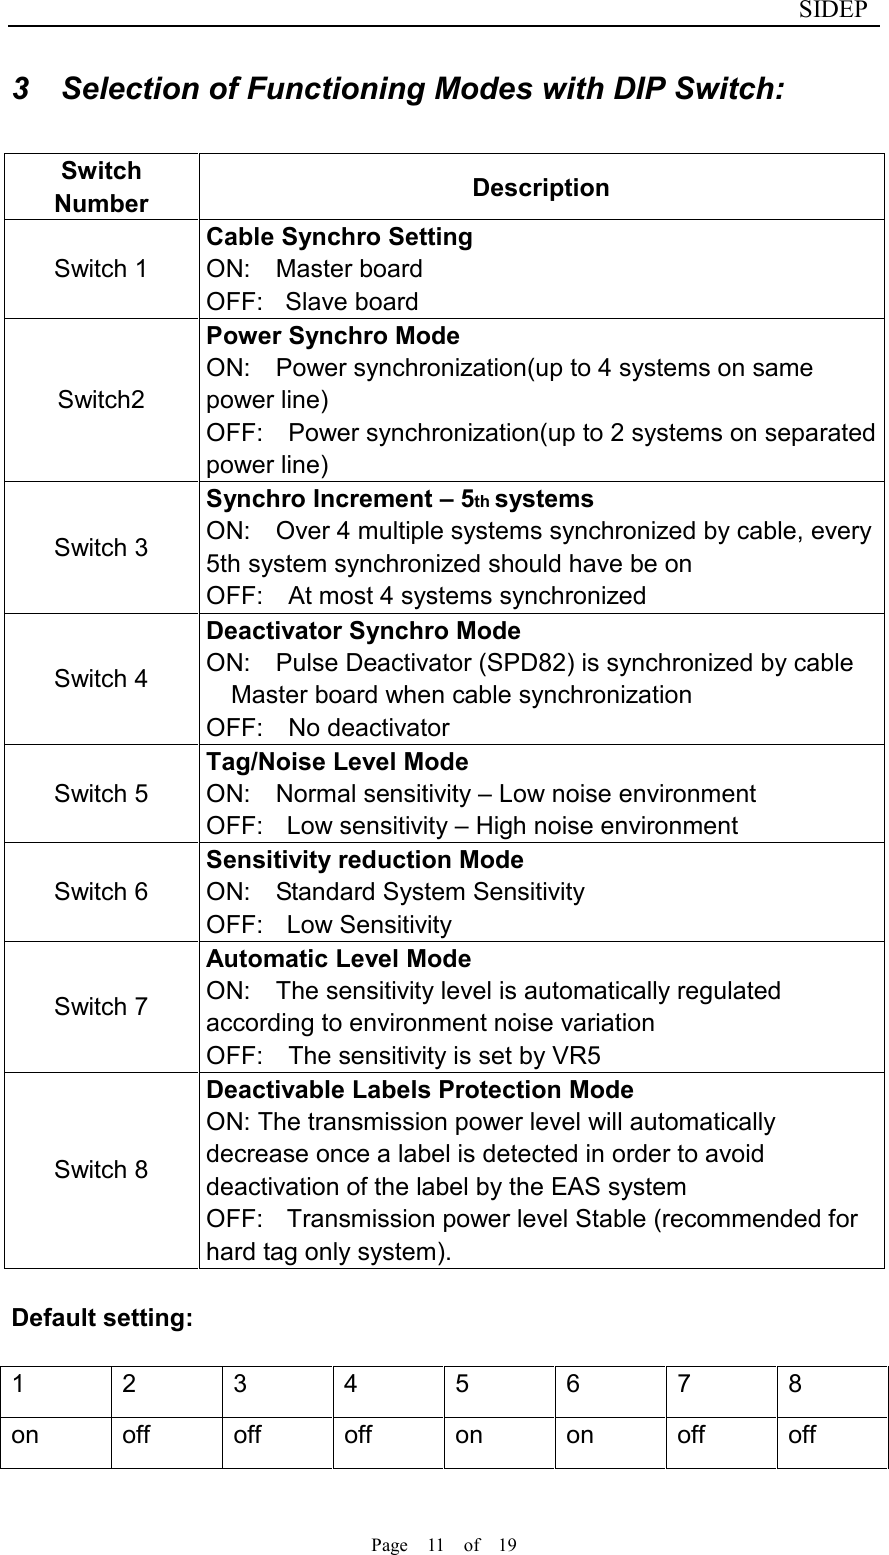                              SIDEP Page    11    of    19   3    Selection of Functioning Modes with DIP Switch:  Switch Number  Description Switch 1 Cable Synchro Setting ON:    Master board   OFF:    Slave board Switch2 Power Synchro Mode ON:    Power synchronization(up to 4 systems on same power line) OFF:    Power synchronization(up to 2 systems on separated power line) Switch 3 Synchro Increment – 5th systems ON:    Over 4 multiple systems synchronized by cable, every 5th system synchronized should have be on OFF:    At most 4 systems synchronized Switch 4 Deactivator Synchro Mode ON:    Pulse Deactivator (SPD82) is synchronized by cable Master board when cable synchronization OFF:    No deactivator Switch 5 Tag/Noise Level Mode ON:    Normal sensitivity – Low noise environment OFF:    Low sensitivity – High noise environment Switch 6 Sensitivity reduction Mode ON:    Standard System Sensitivity OFF:    Low Sensitivity Switch 7 Automatic Level Mode ON:    The sensitivity level is automatically regulated according to environment noise variation OFF:    The sensitivity is set by VR5 Switch 8 Deactivable Labels Protection Mode ON: The transmission power level will automatically decrease once a label is detected in order to avoid deactivation of the label by the EAS system OFF:    Transmission power level Stable (recommended for hard tag only system).  Default setting:  1  2  3  4  5  6  7  8 on  off  off  off  on  on  off  off 